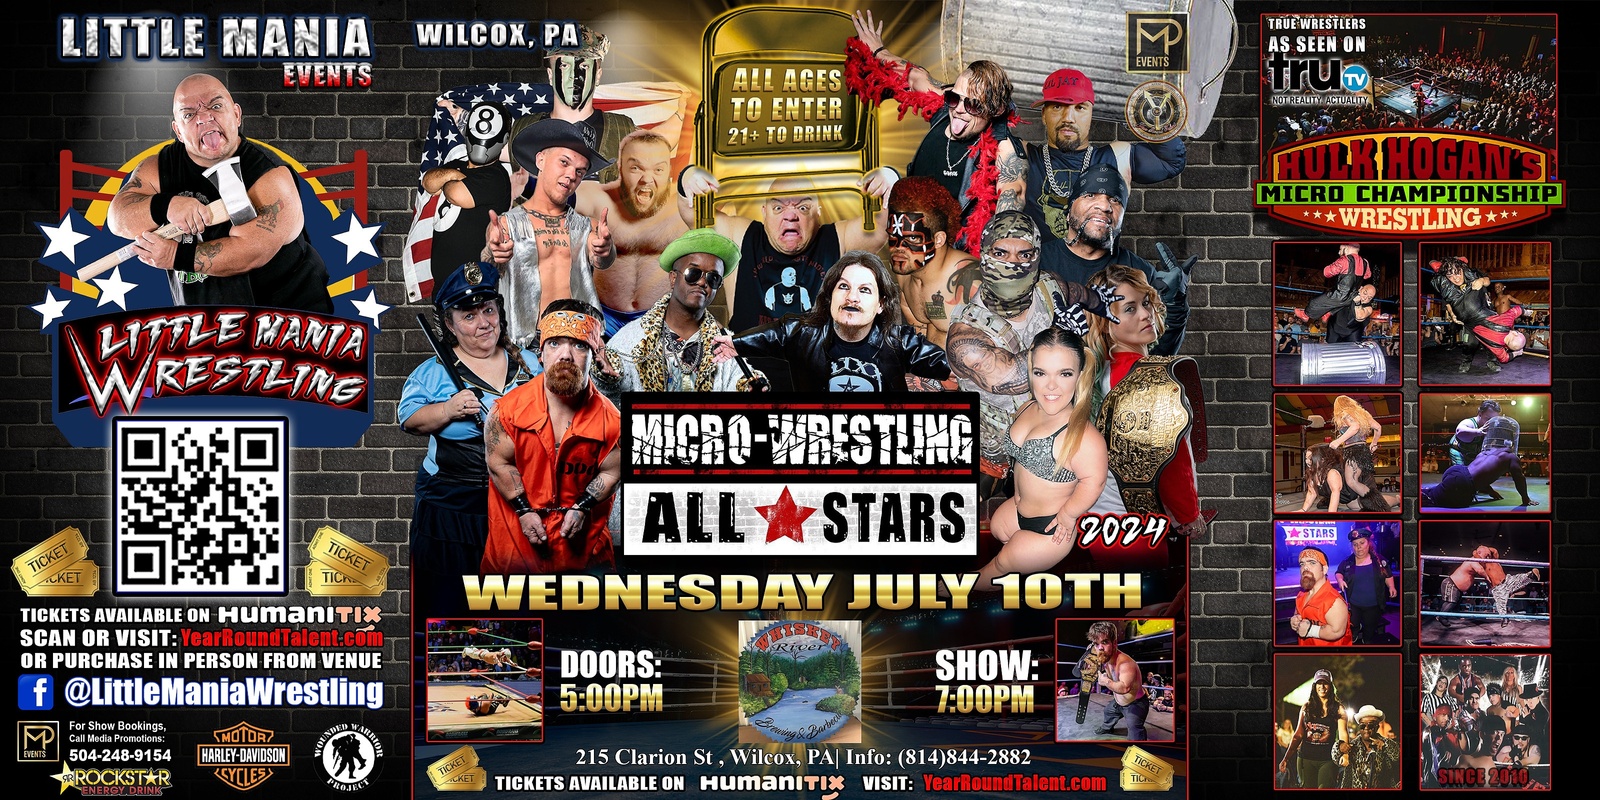 Banner image for Wilcox, PA -- Micro-Wrestling All * Stars: Little Mania Rips Through the Ring!